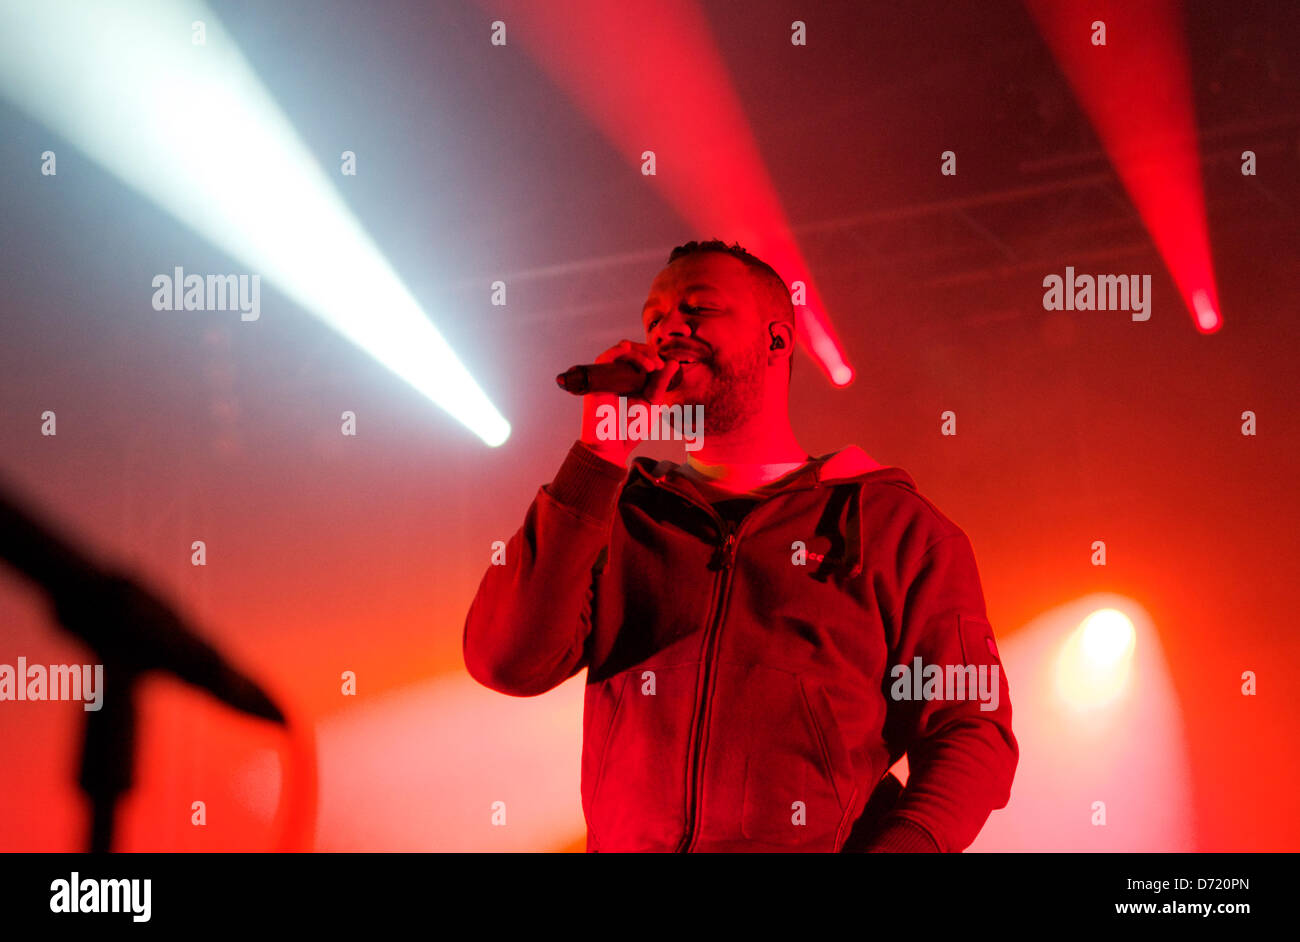 Almada, Portugal. April 24 2013. Boss AC and his band performs in Almada in a concert for 25 April day commemoration. The image shows a Boss AC portrait during the concert. Credit: Bruno Monico/Alamy Live News Stock Photo